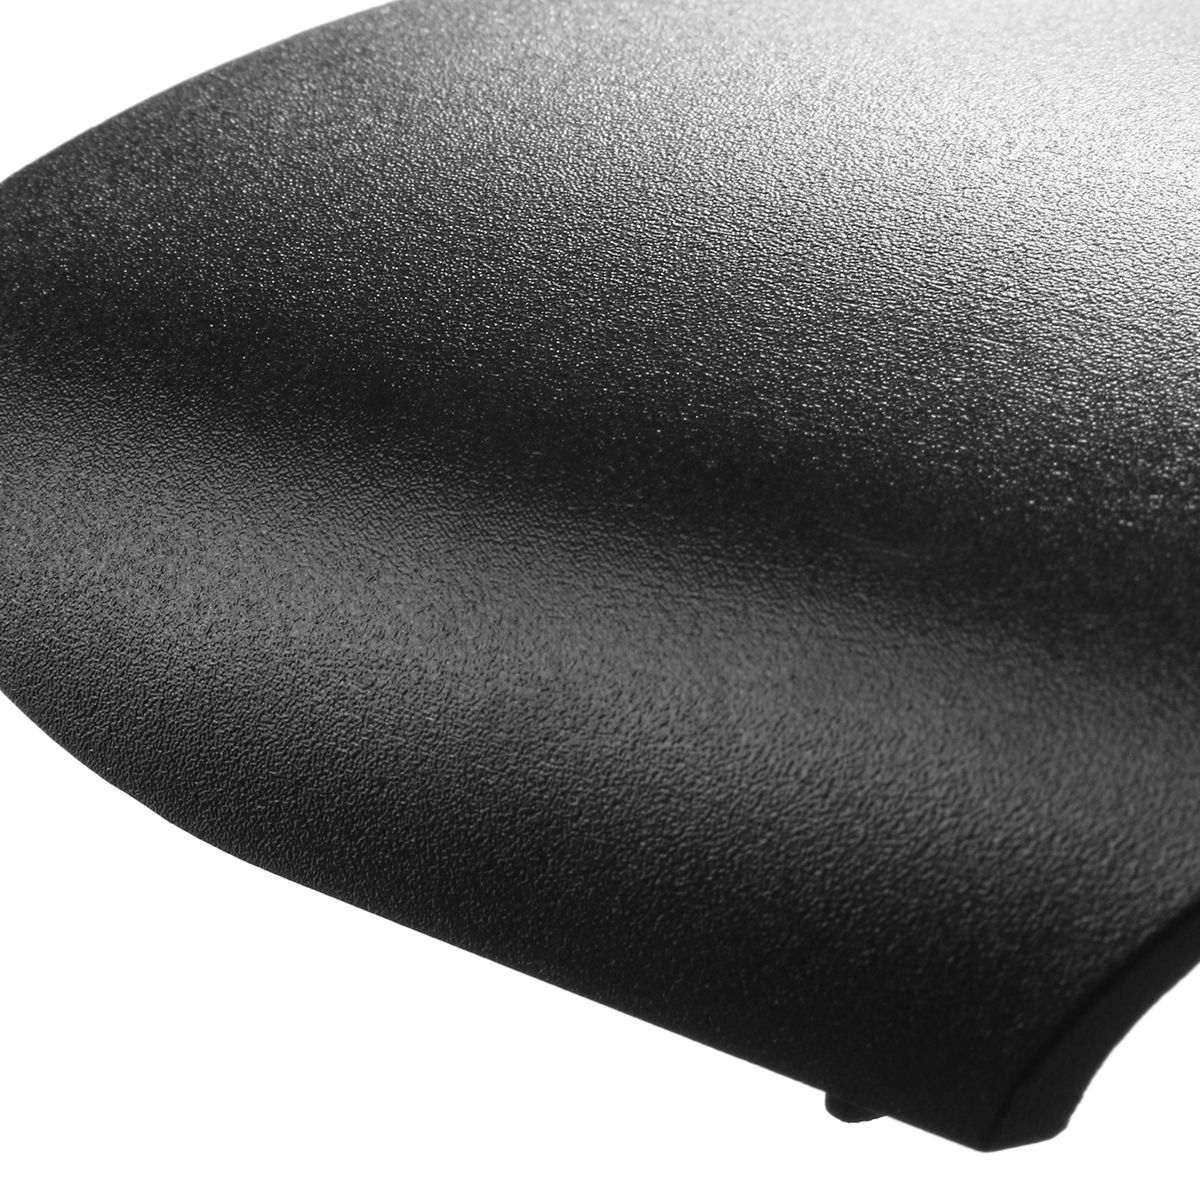 Car-Replacement-Rear-View-Mirror-Cap-Cover-Right-735539384-For-Fiat-Grande-Punto-1629146